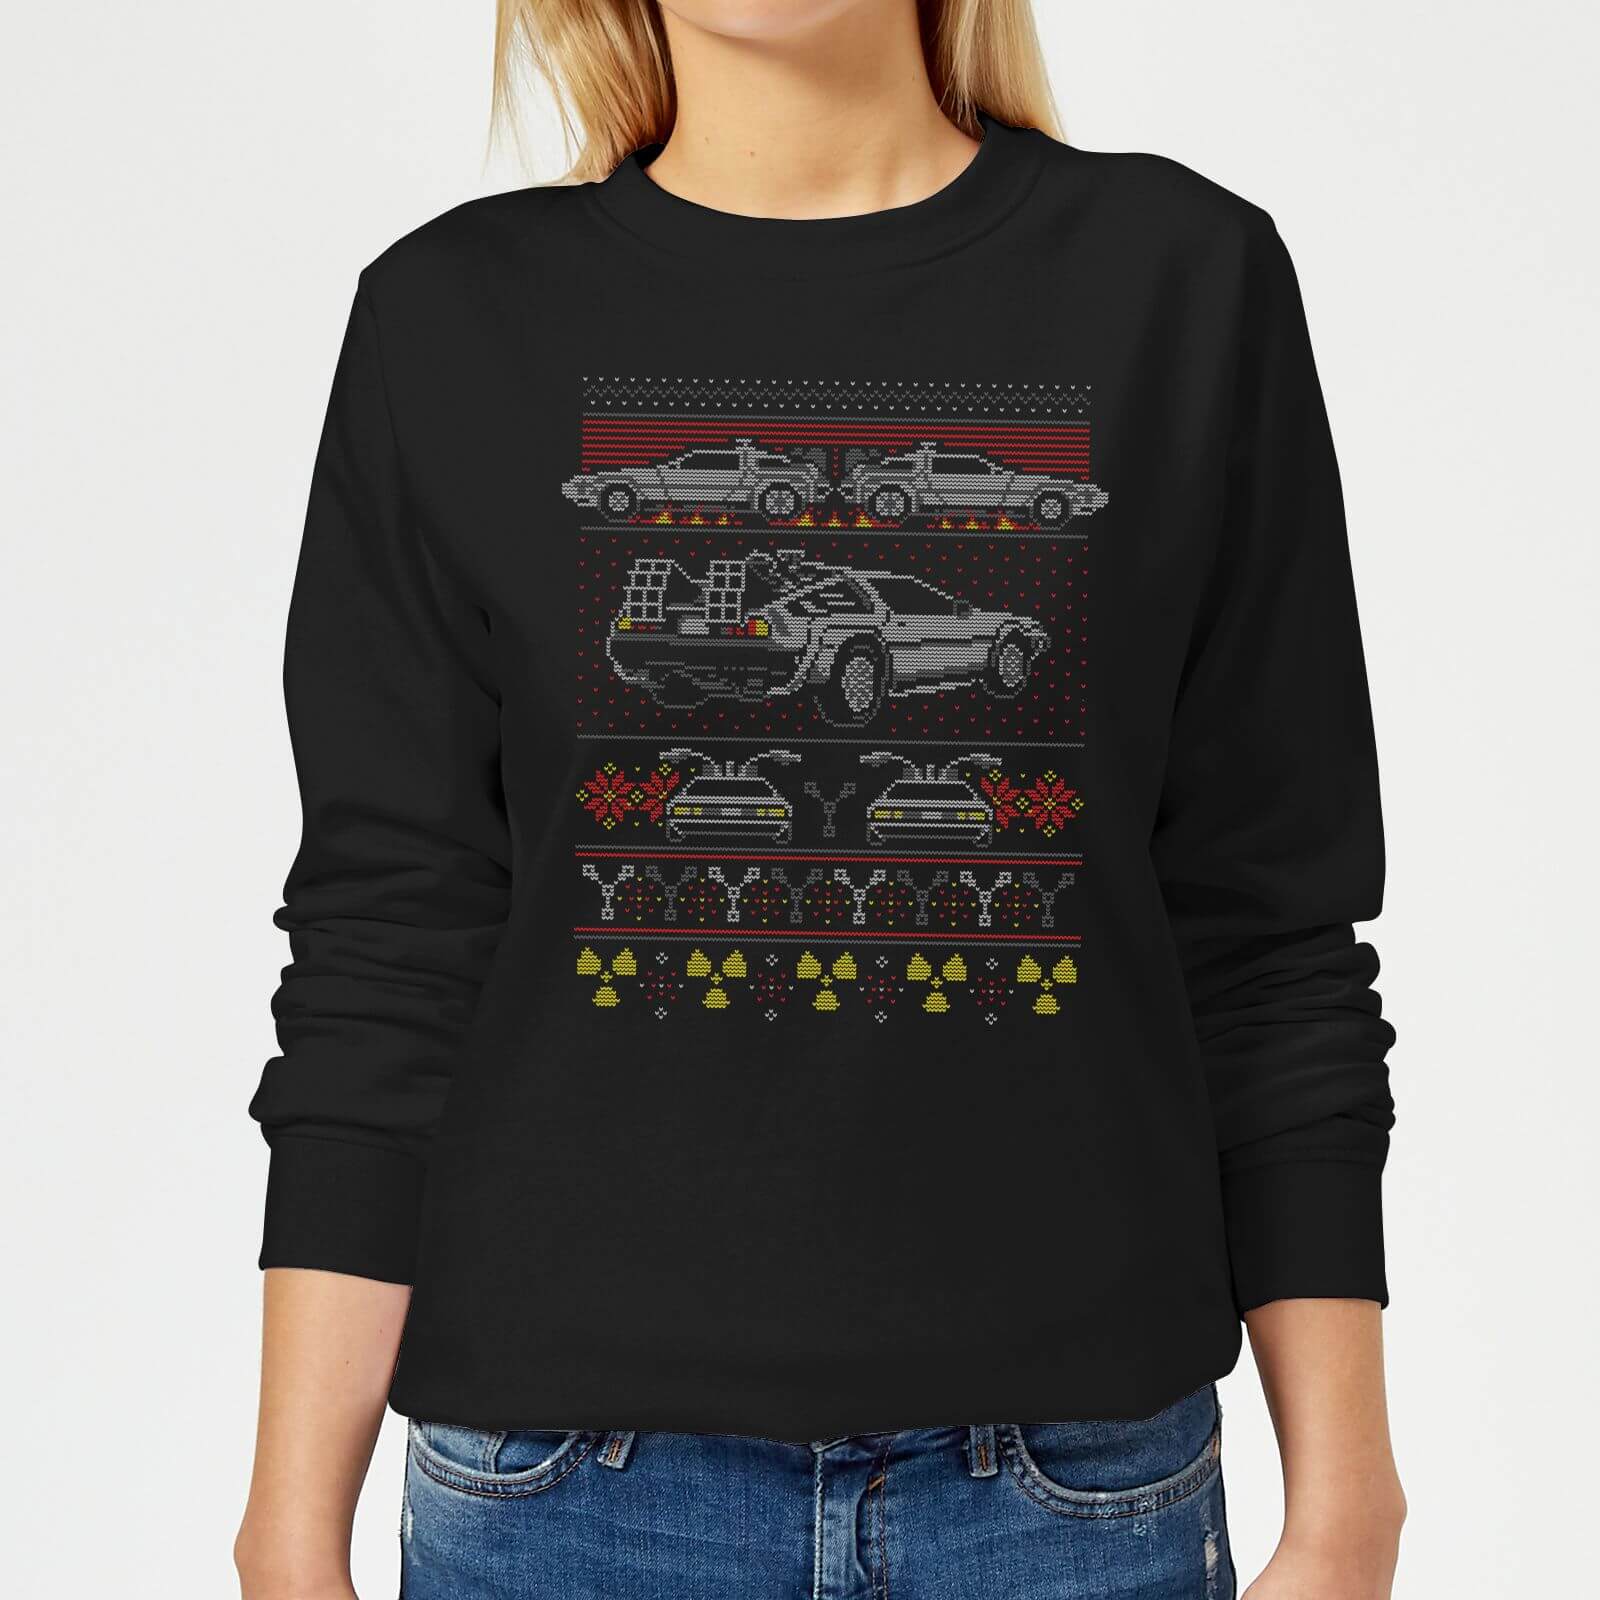 Back To The Future Back In Time for Christmas Sudadera Navideña de Mujer 